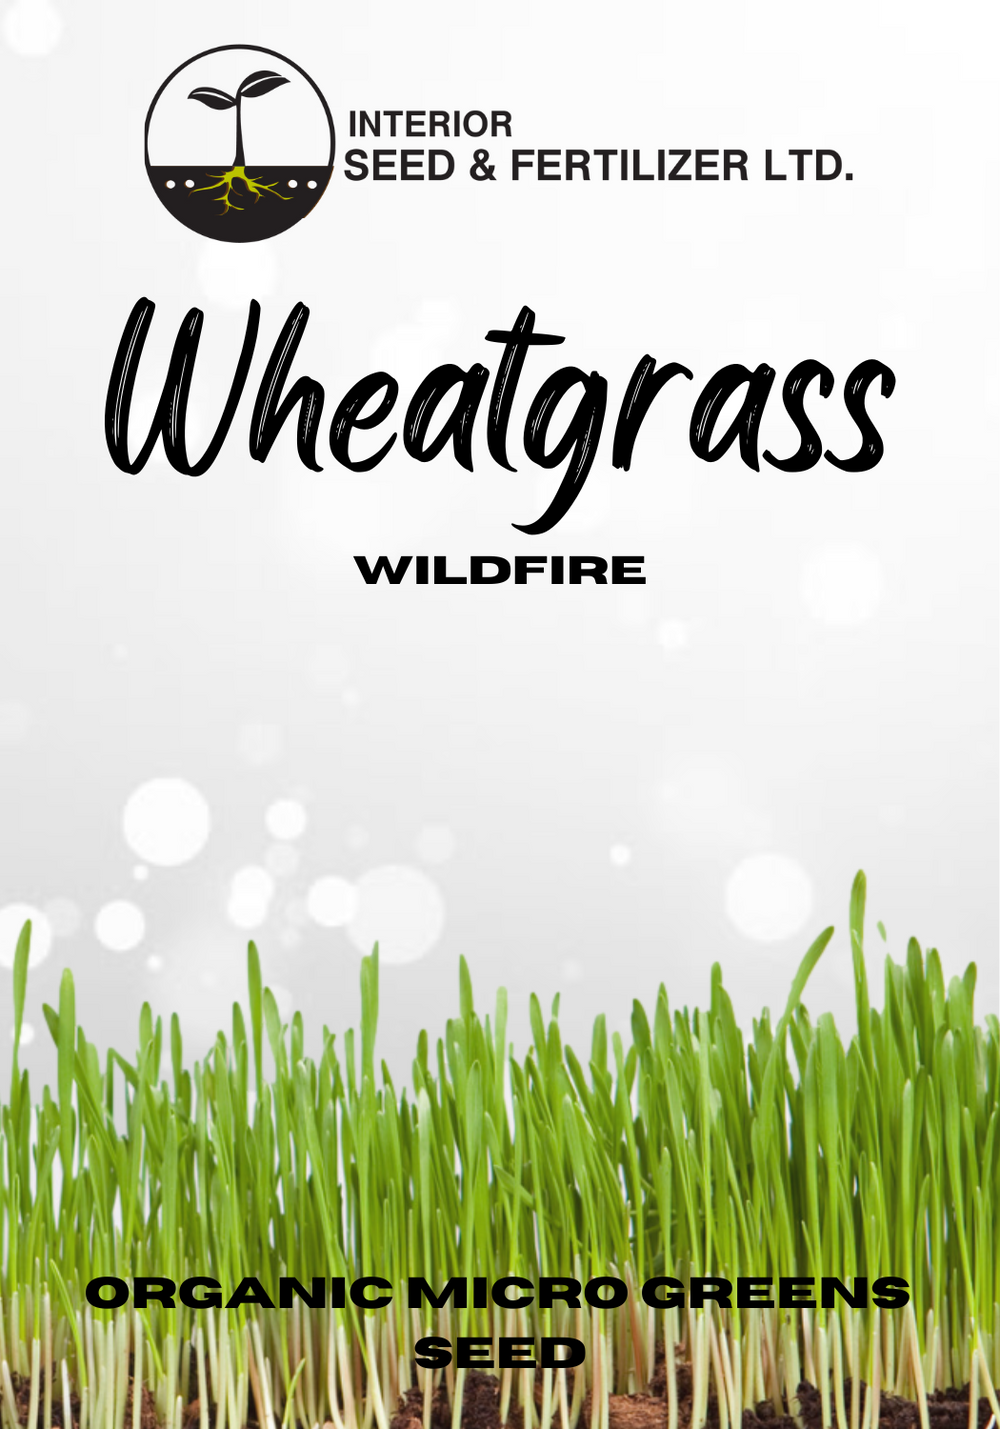 Ignite your taste buds with our Wildfire Wheatgrass organic microgreens. These robust greens offer a rich, earthy flavor with a hint of sweetness, making them a perfect addition to smoothies, juices, or as a garnish for your favorite dishes. From Interior Seed and Fertilizer Garden Center in Cranbrook BC